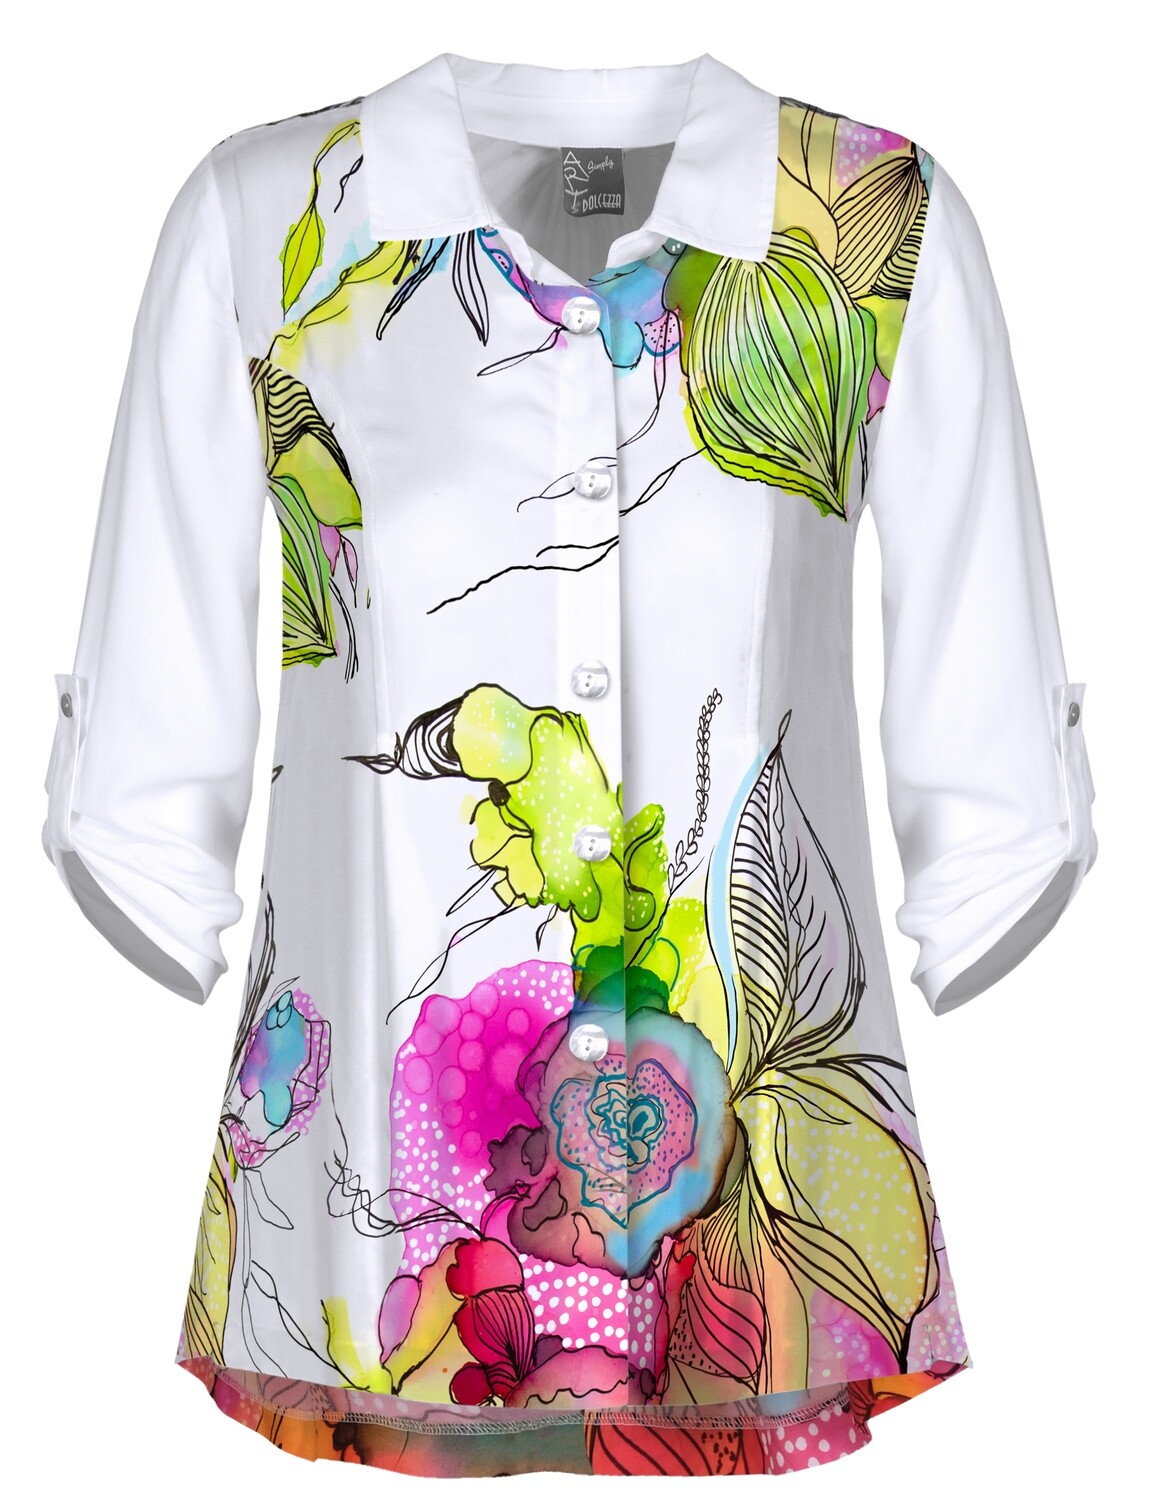 Simply Art Dolcezza: Full Of Vivacity Abstract Art Buttoned High Low Blouse SOLD OUT